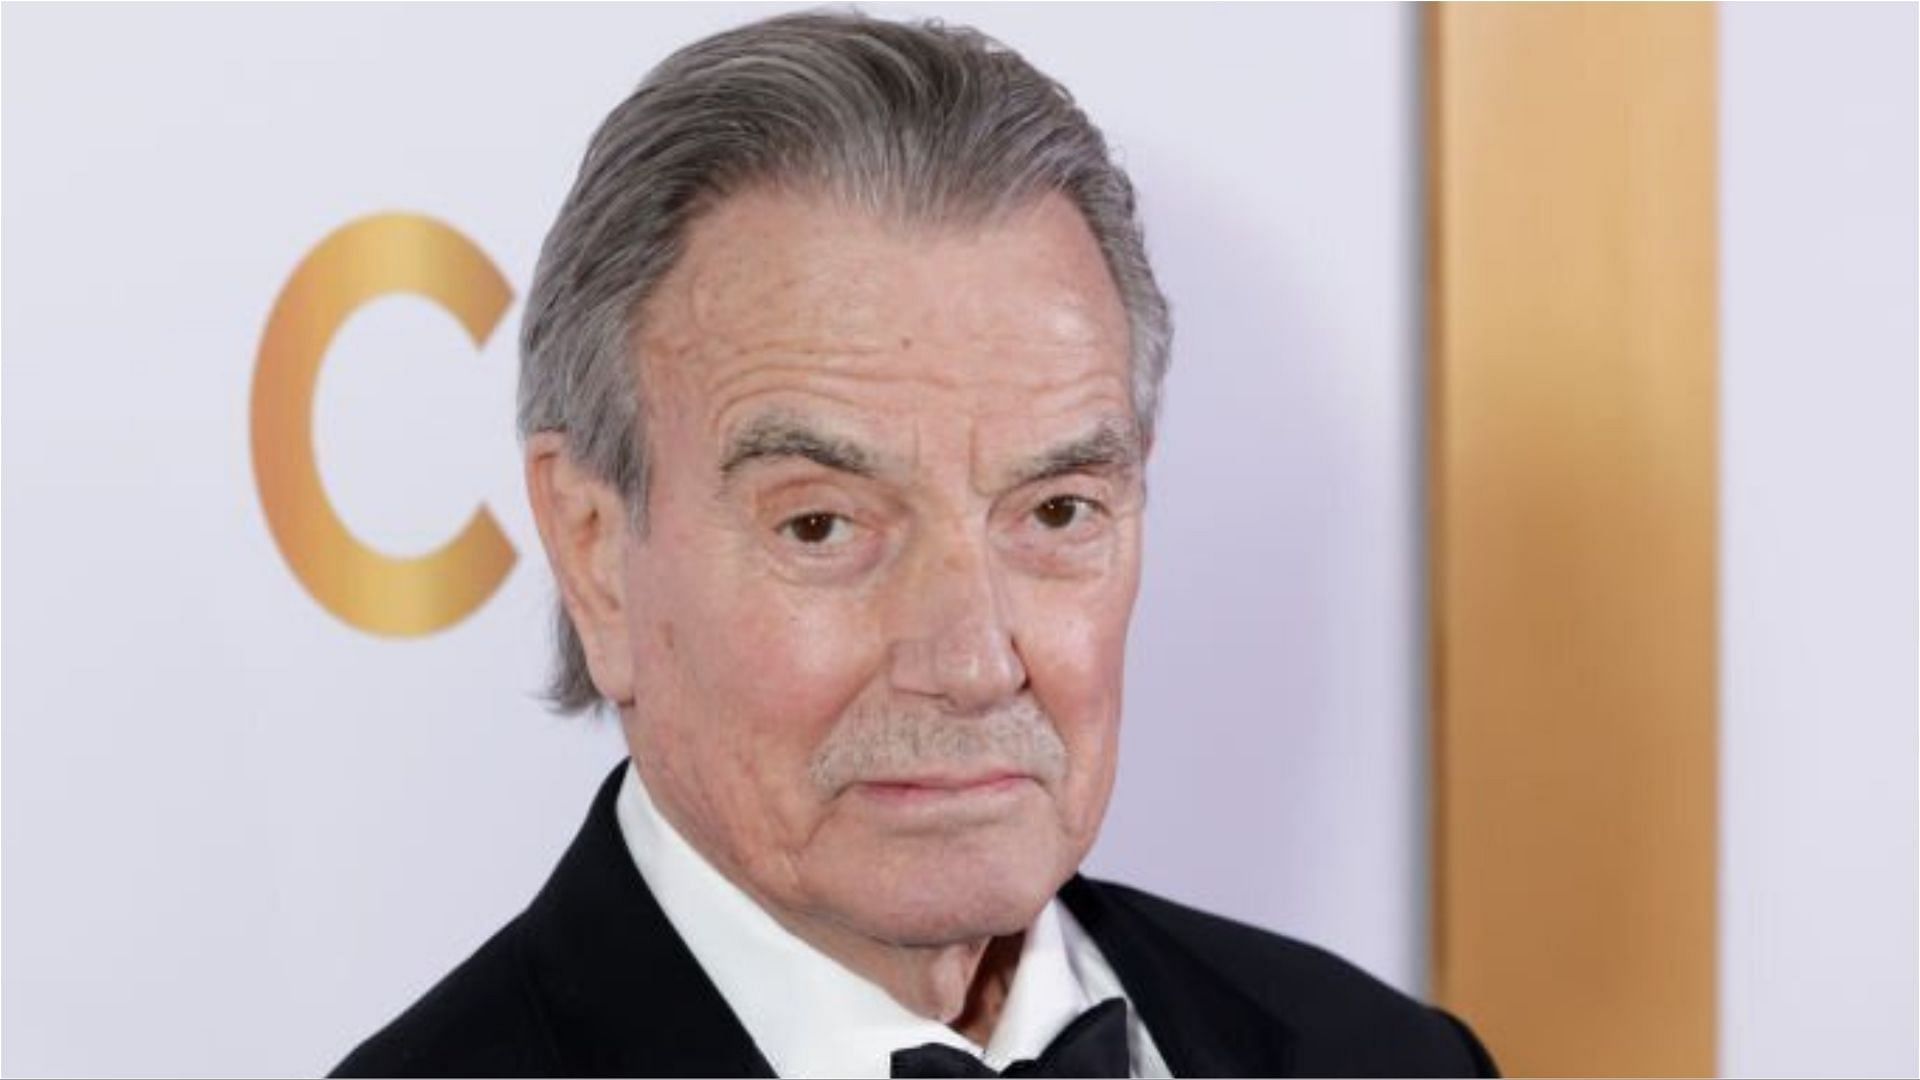 Eric Braeden disclosed that he has been diagnosed with cancer (Image via Francis Specker/Getty Images)